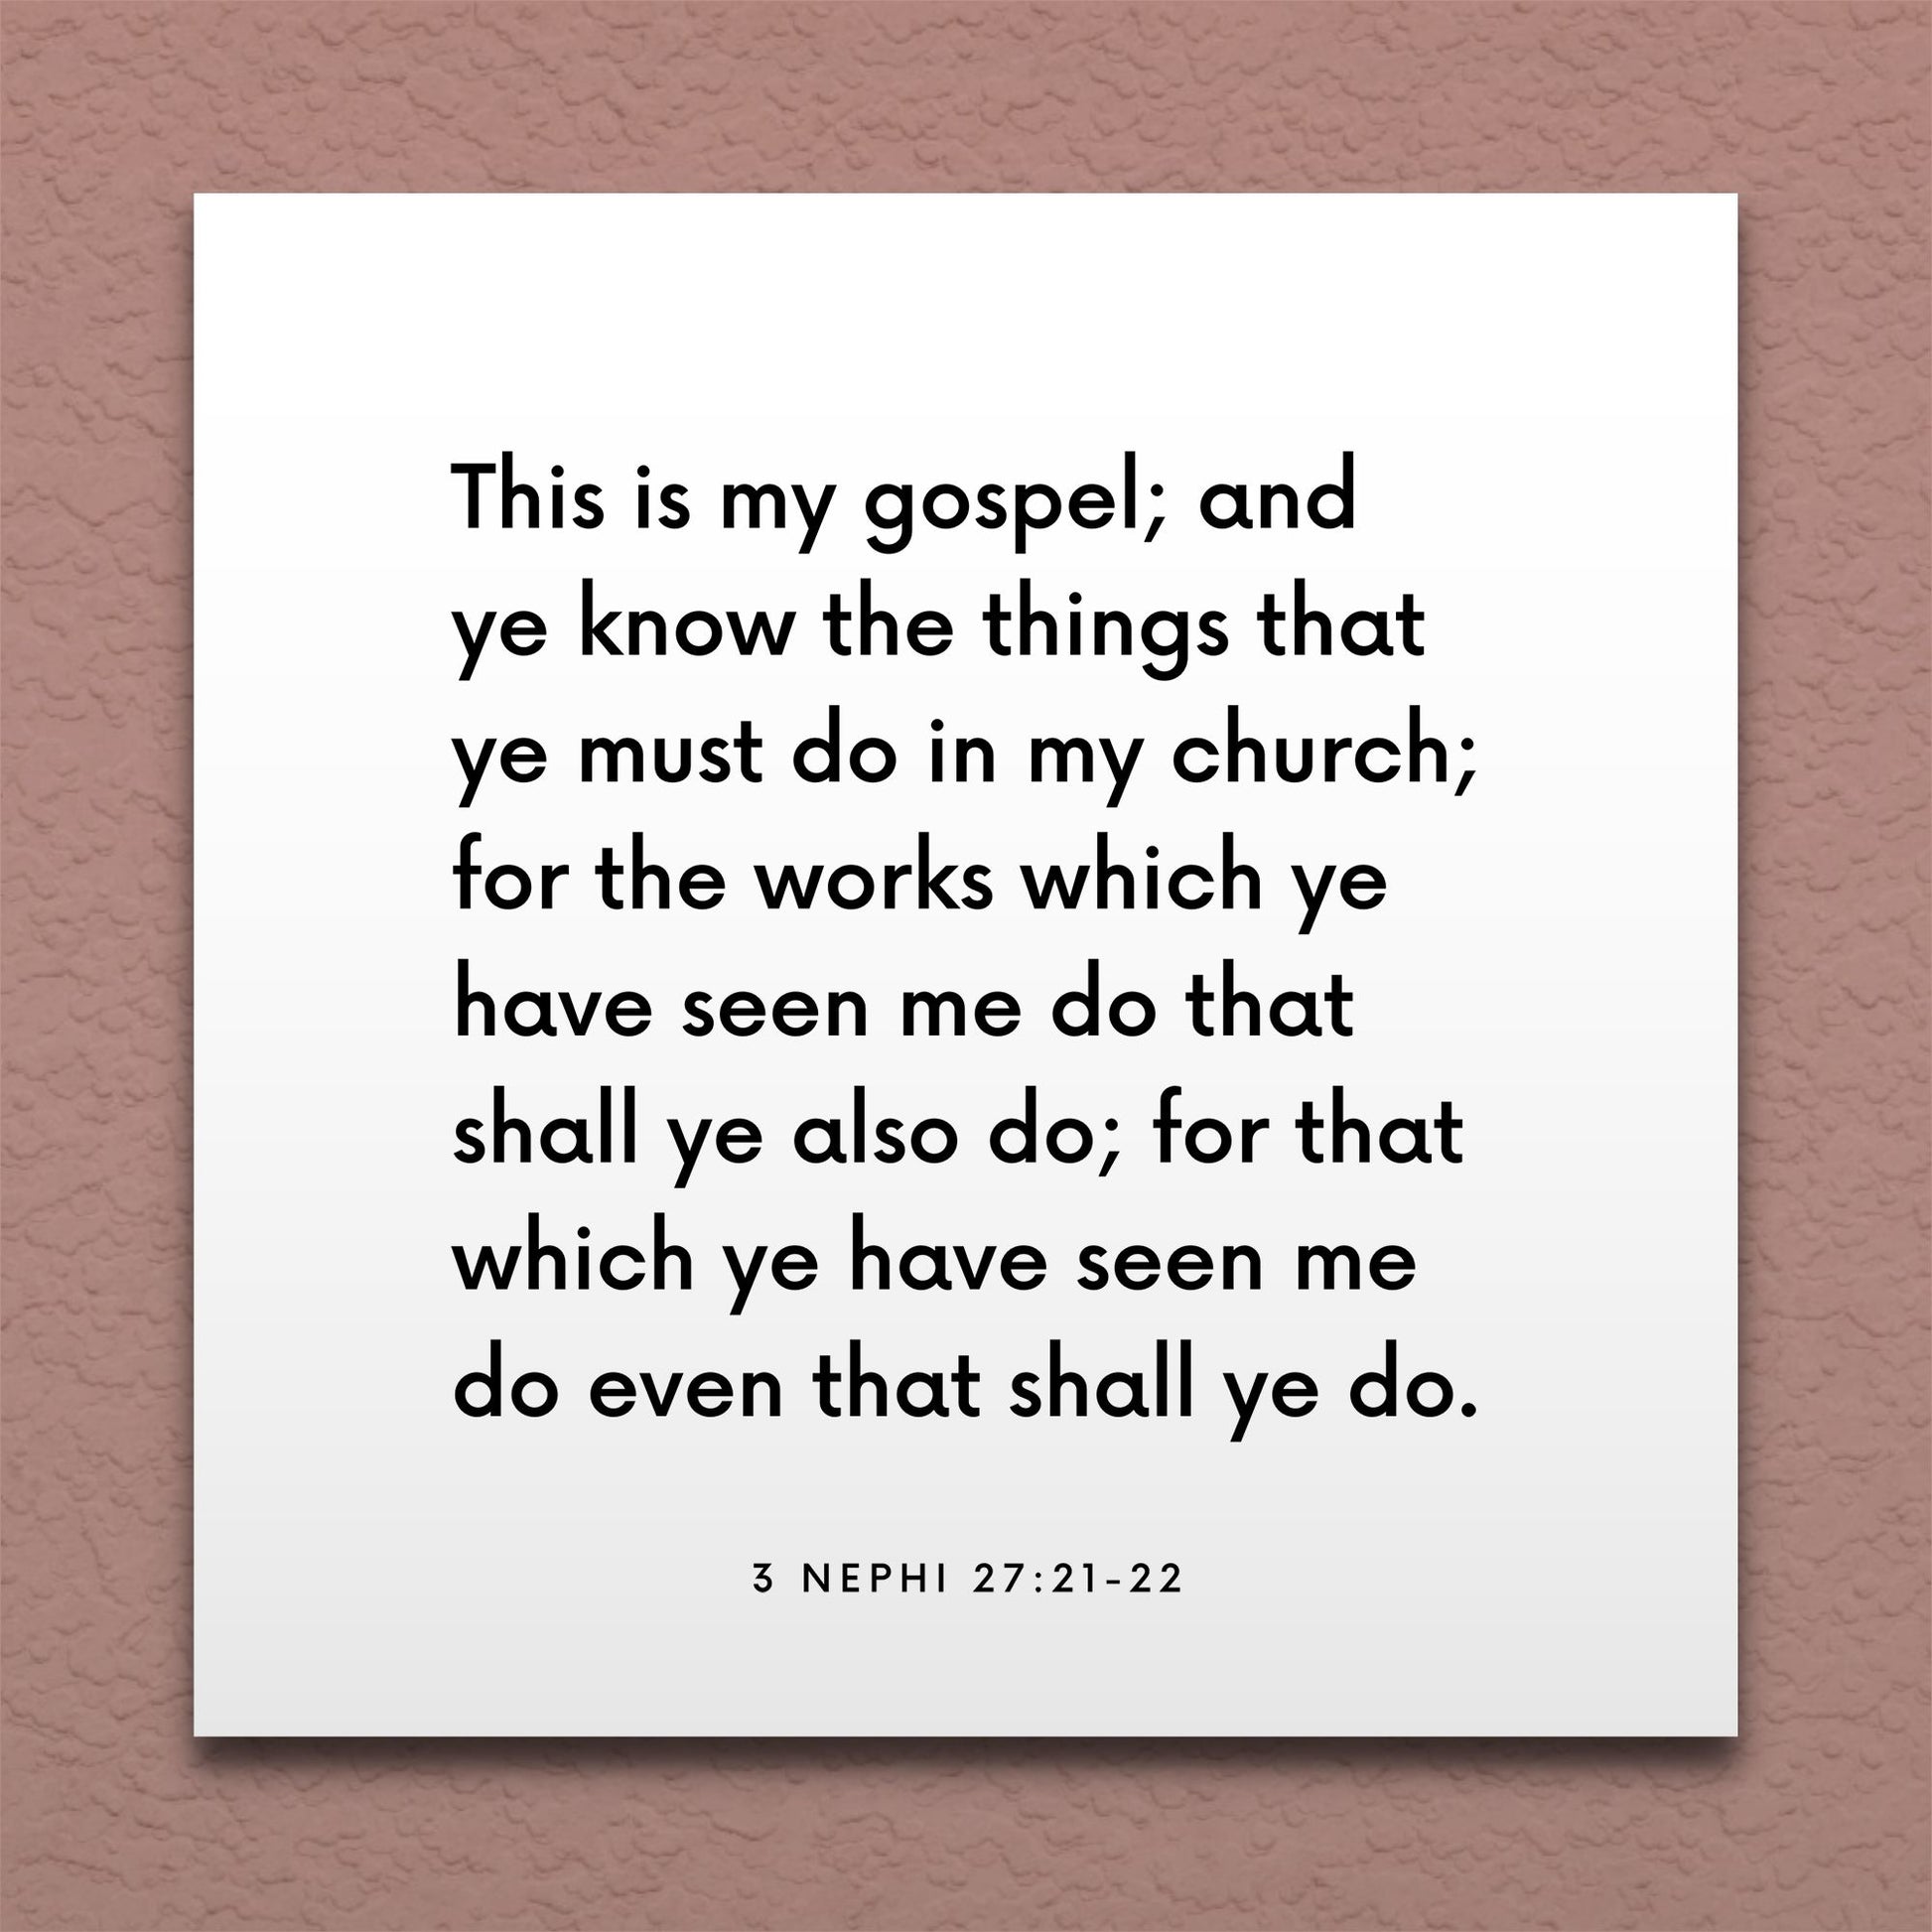 Wall-mounted scripture tile for 3 Nephi 27:21-22 - "Ye know the things that ye must do in my church"